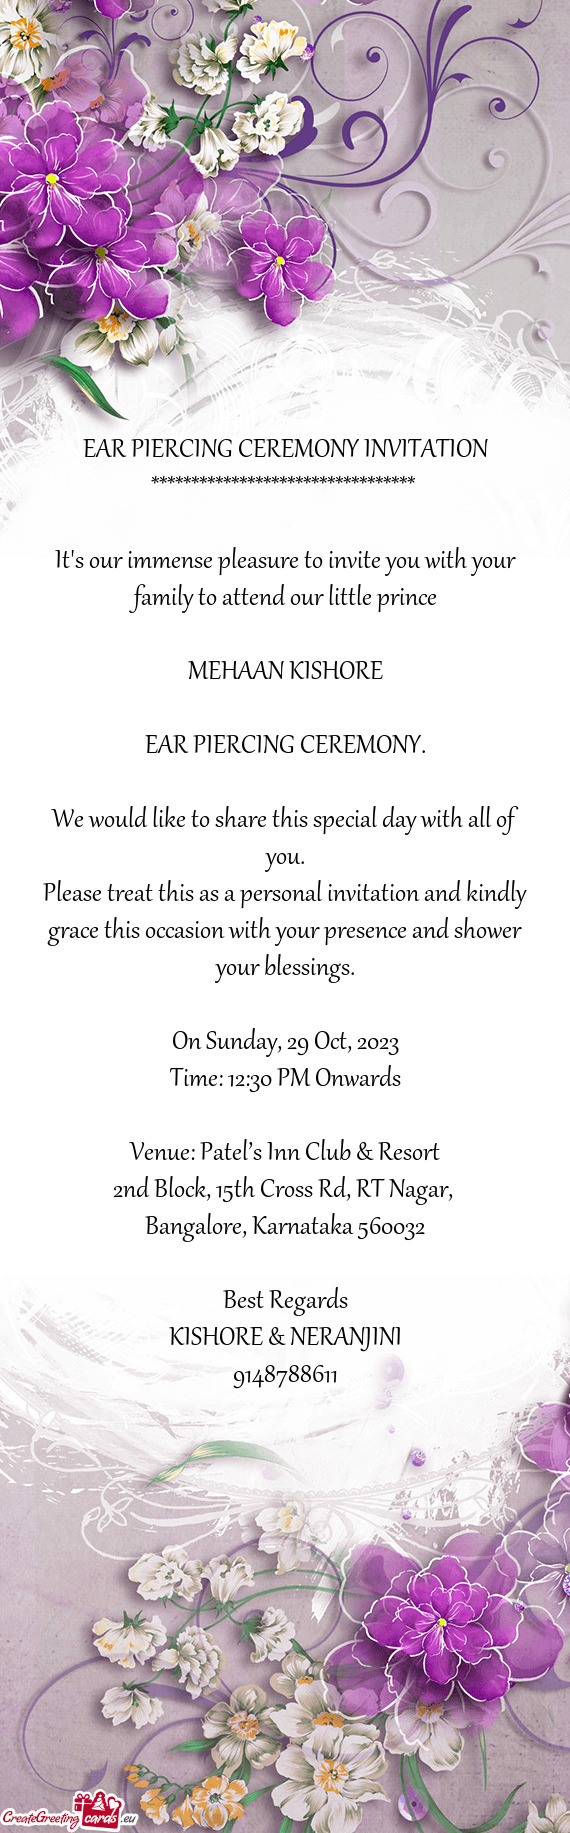 Please treat this as a personal invitation and kindly grace this occasion with your presence and sho